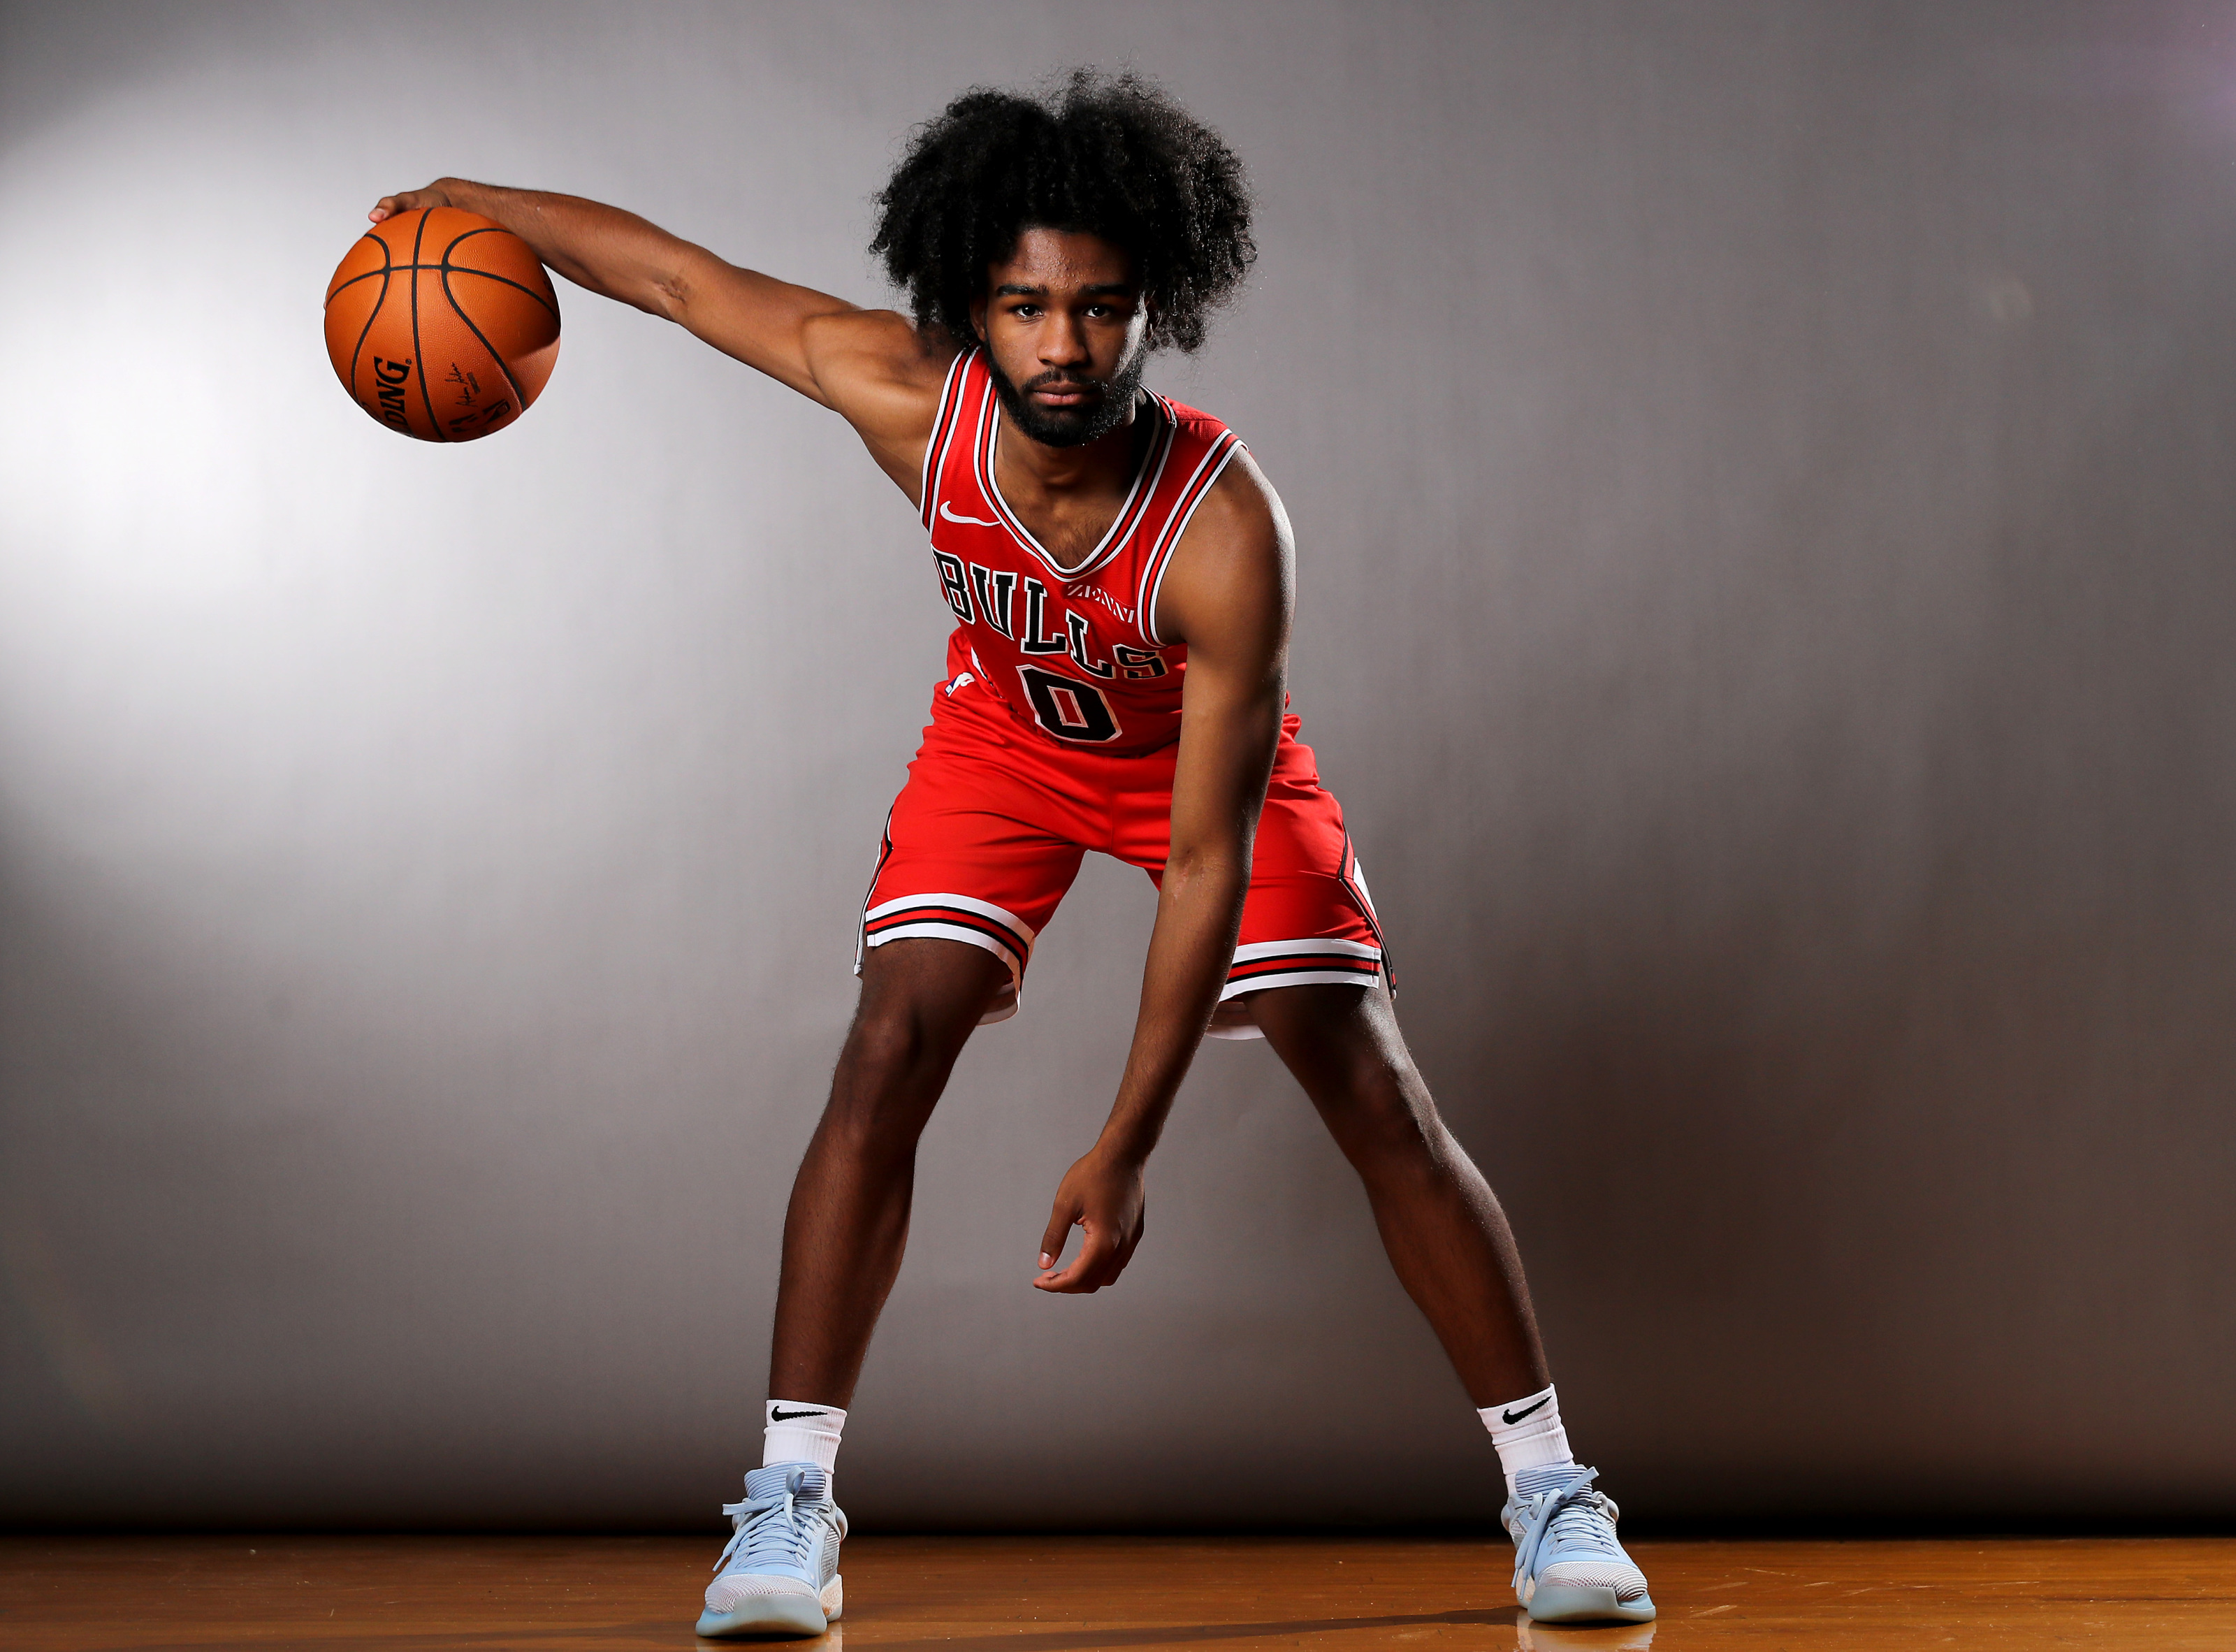 Coby White manes NBA history in Chicago Bulls' win